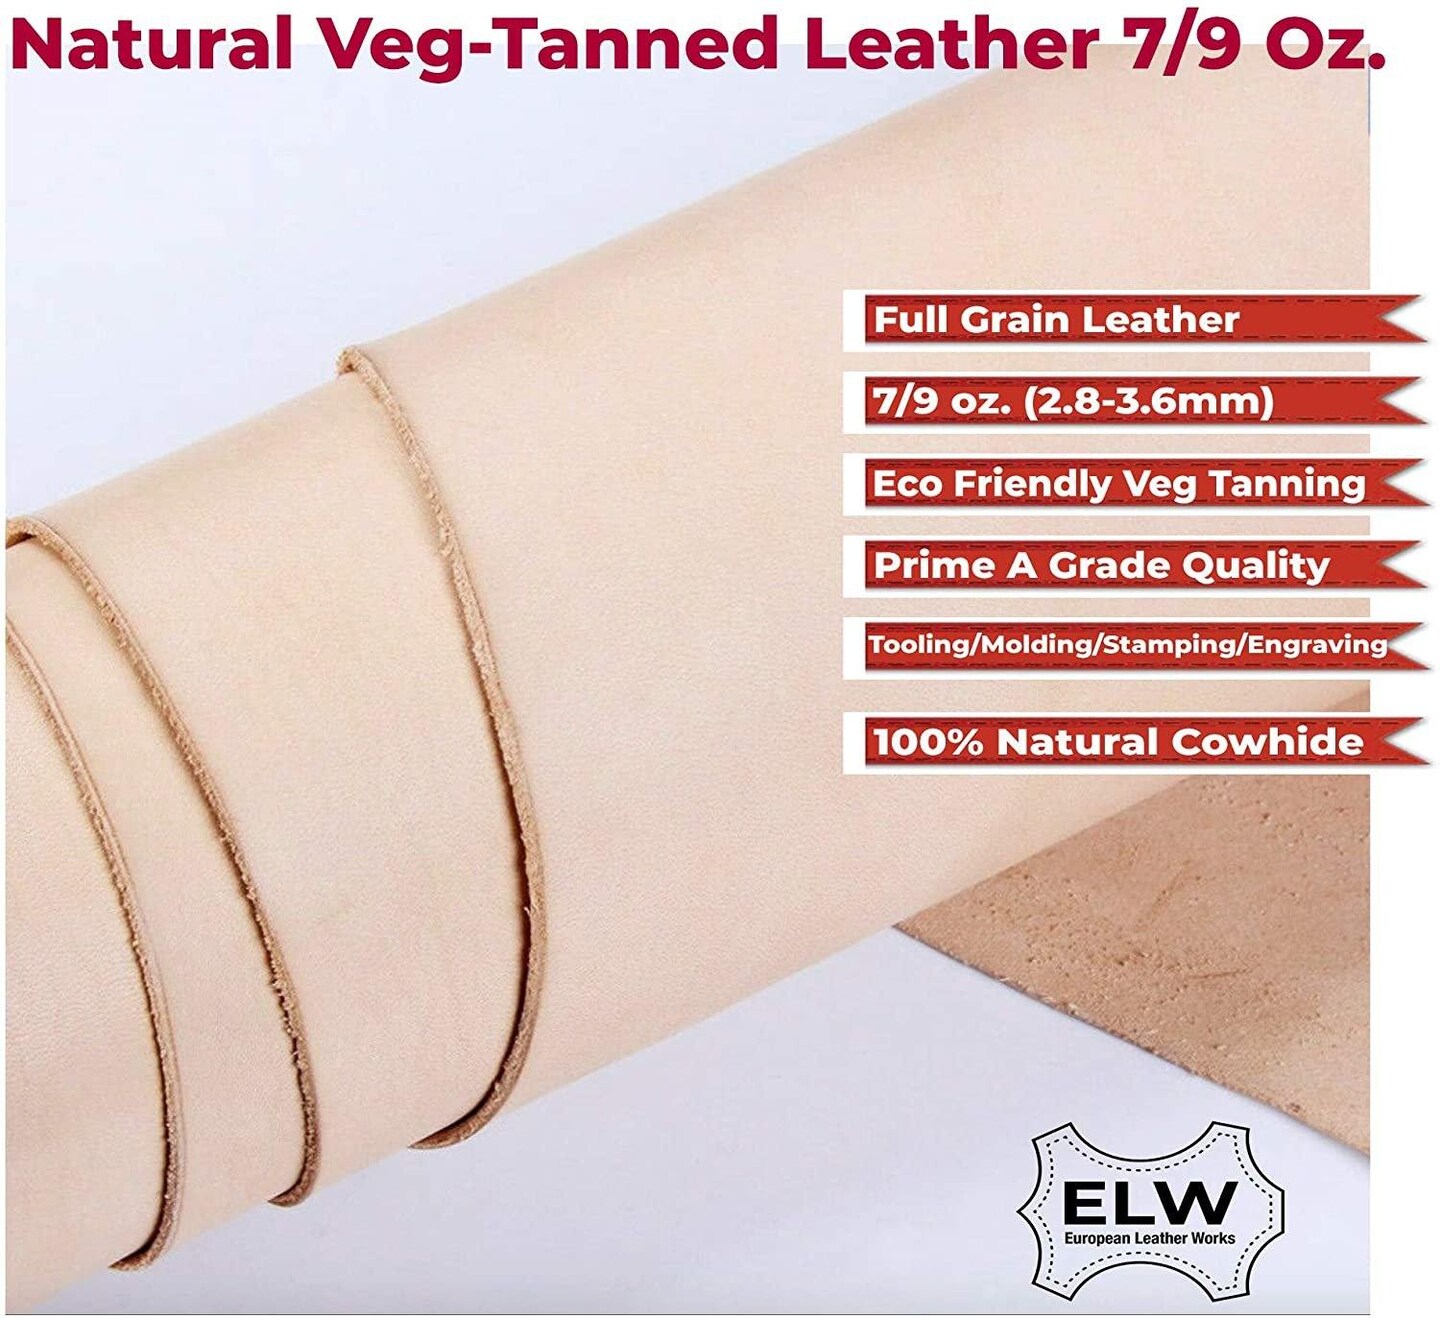  ELW 2-10 oz (.8-4mm) Thickness, 1 LB Vegetable Tanned